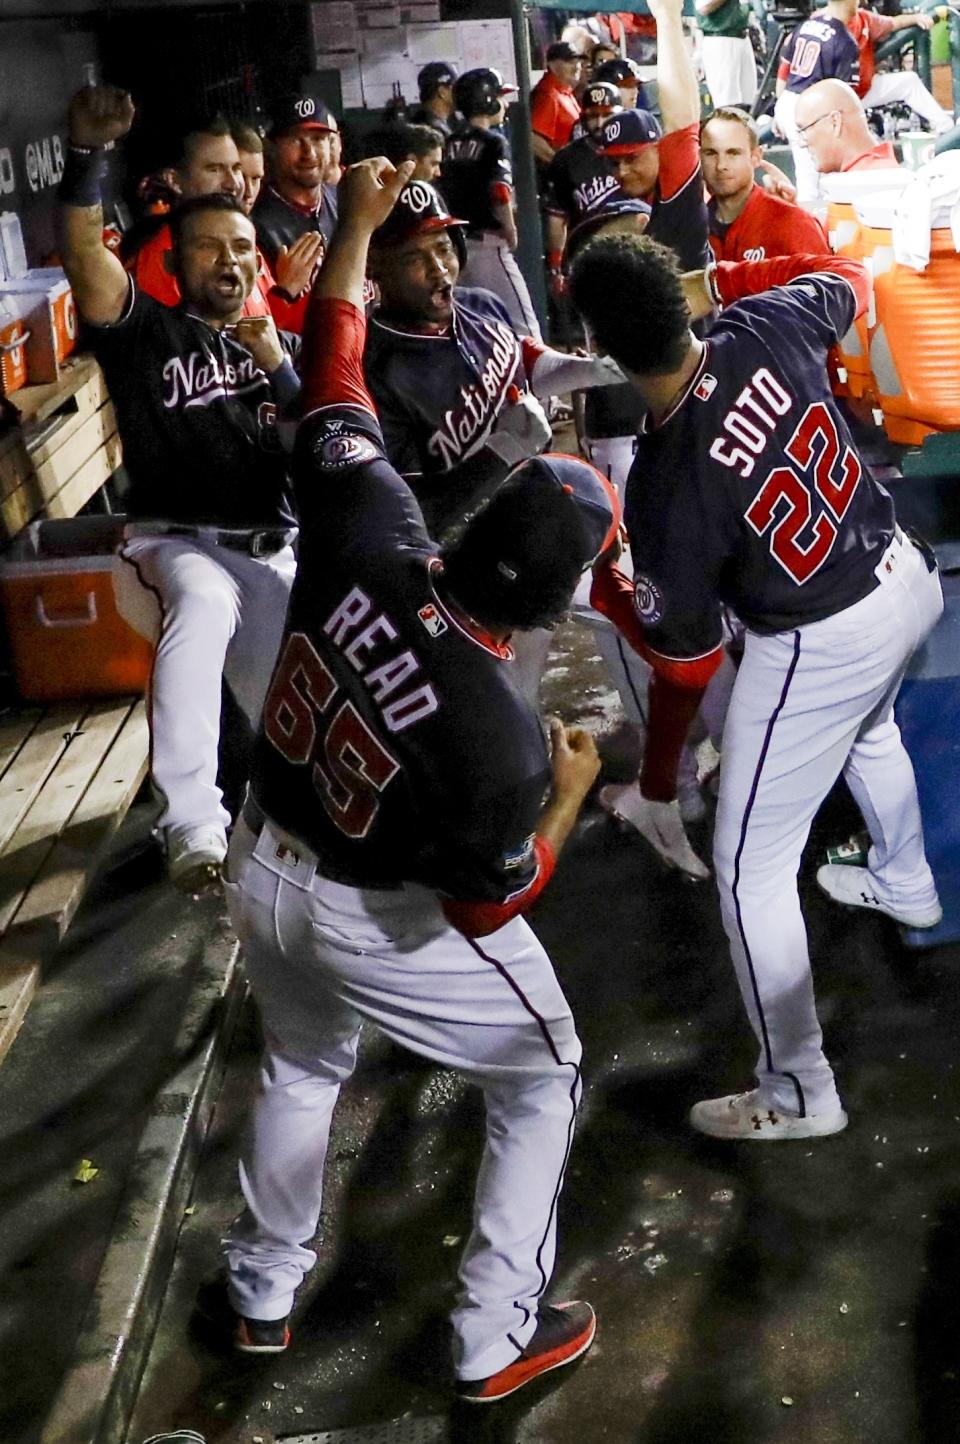 Washington Nationals' Victor Robles celebrates with teammates after hitting a home run during the sixth inning of Game 3 of the baseball National League Championship Series against the Washington Nationals Monday, Oct. 14, 2019, in Washington. (AP Photo/Jeff Roberson)